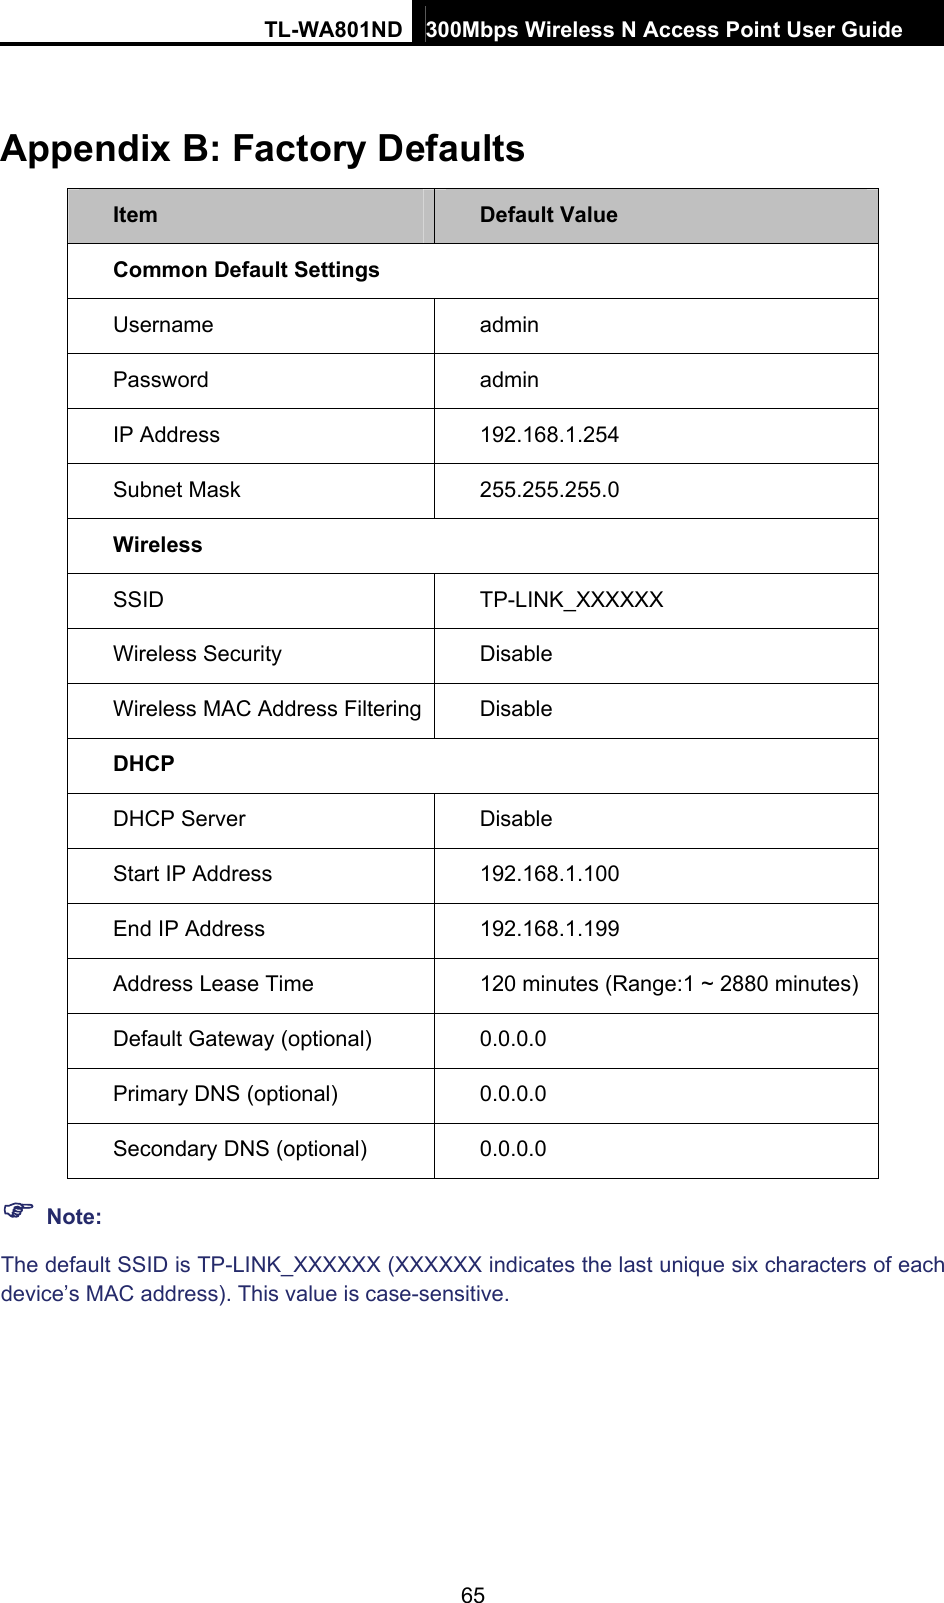 TL-WA801ND 300Mbps Wireless N Access Point User Guide  65 Appendix B: Factory Defaults Item  Default Value Common Default Settings Username   admin Password  admin IP Address  192.168.1.254 Subnet Mask    255.255.255.0 Wireless SSID  TP-LINK_XXXXXX Wireless Security  Disable Wireless MAC Address Filtering  Disable DHCP DHCP Server  Disable Start IP Address  192.168.1.100 End IP Address  192.168.1.199 Address Lease Time  120 minutes (Range:1 ~ 2880 minutes) Default Gateway (optional)    0.0.0.0 Primary DNS (optional)  0.0.0.0 Secondary DNS (optional)    0.0.0.0 ) Note: The default SSID is TP-LINK_XXXXXX (XXXXXX indicates the last unique six characters of each device’s MAC address). This value is case-sensitive. 